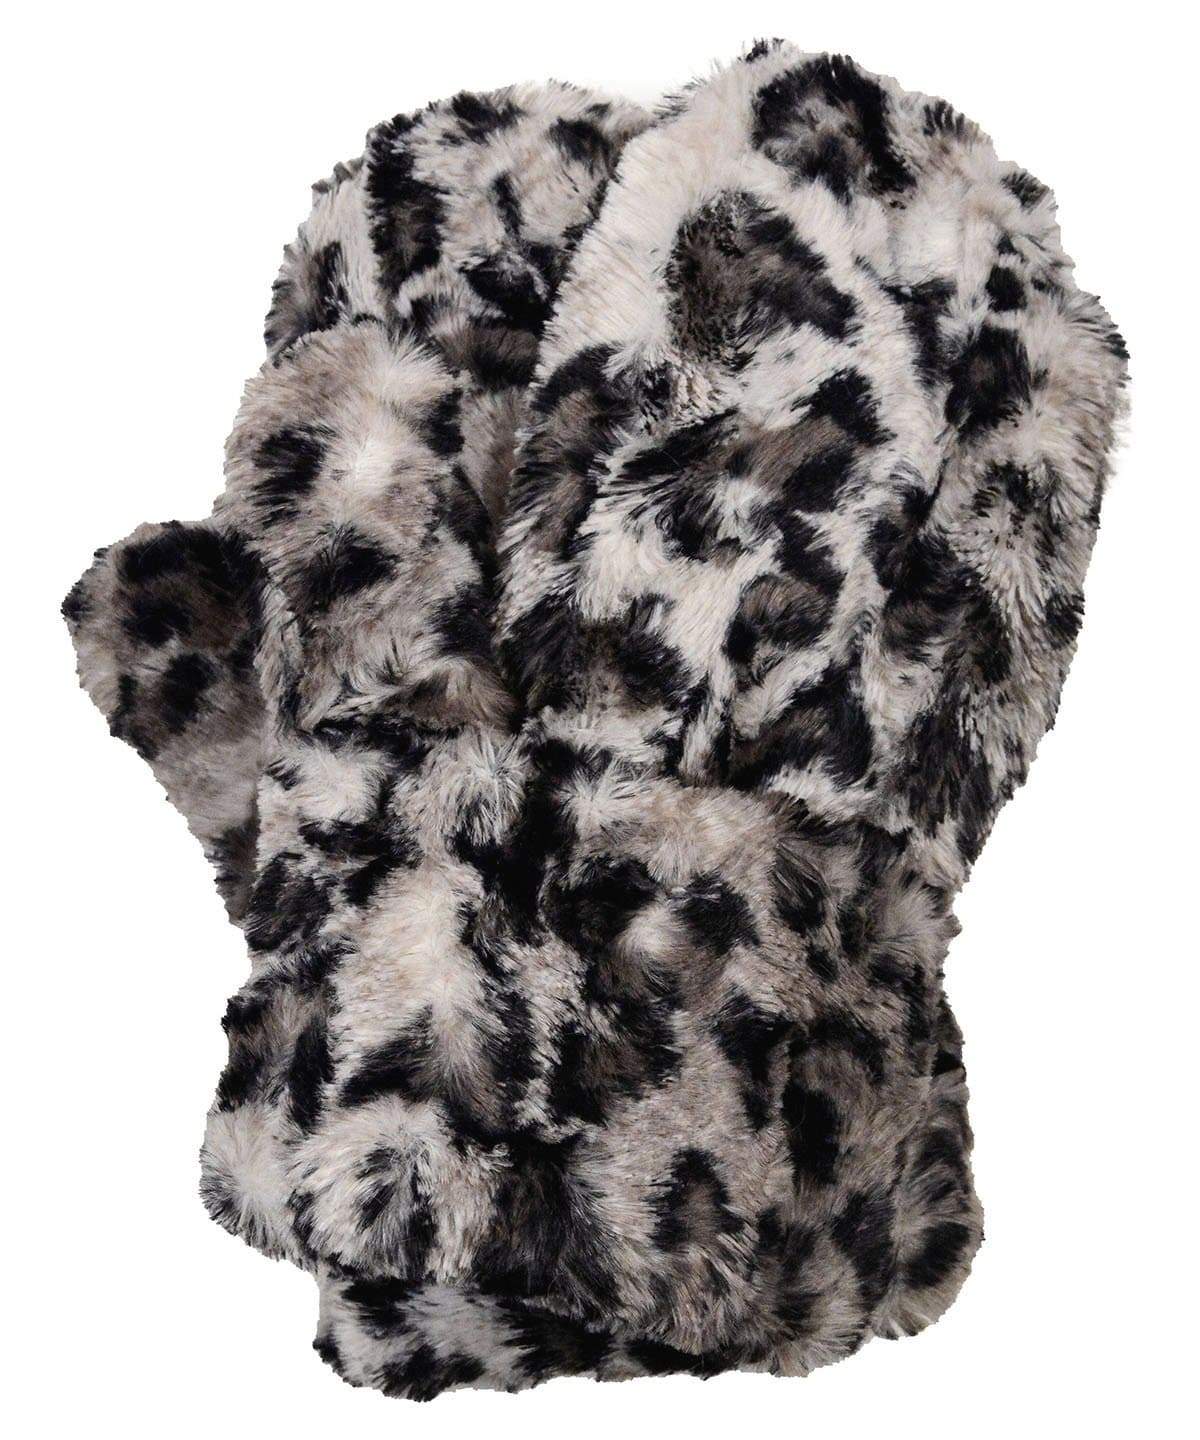 Women’s Product shot of Mittens, Gauntlets and Mitts | Savannah Cat animal print in black, cream and gray Faux Fur | Handmade by Pandemonium Millinery Seattle, WA USA